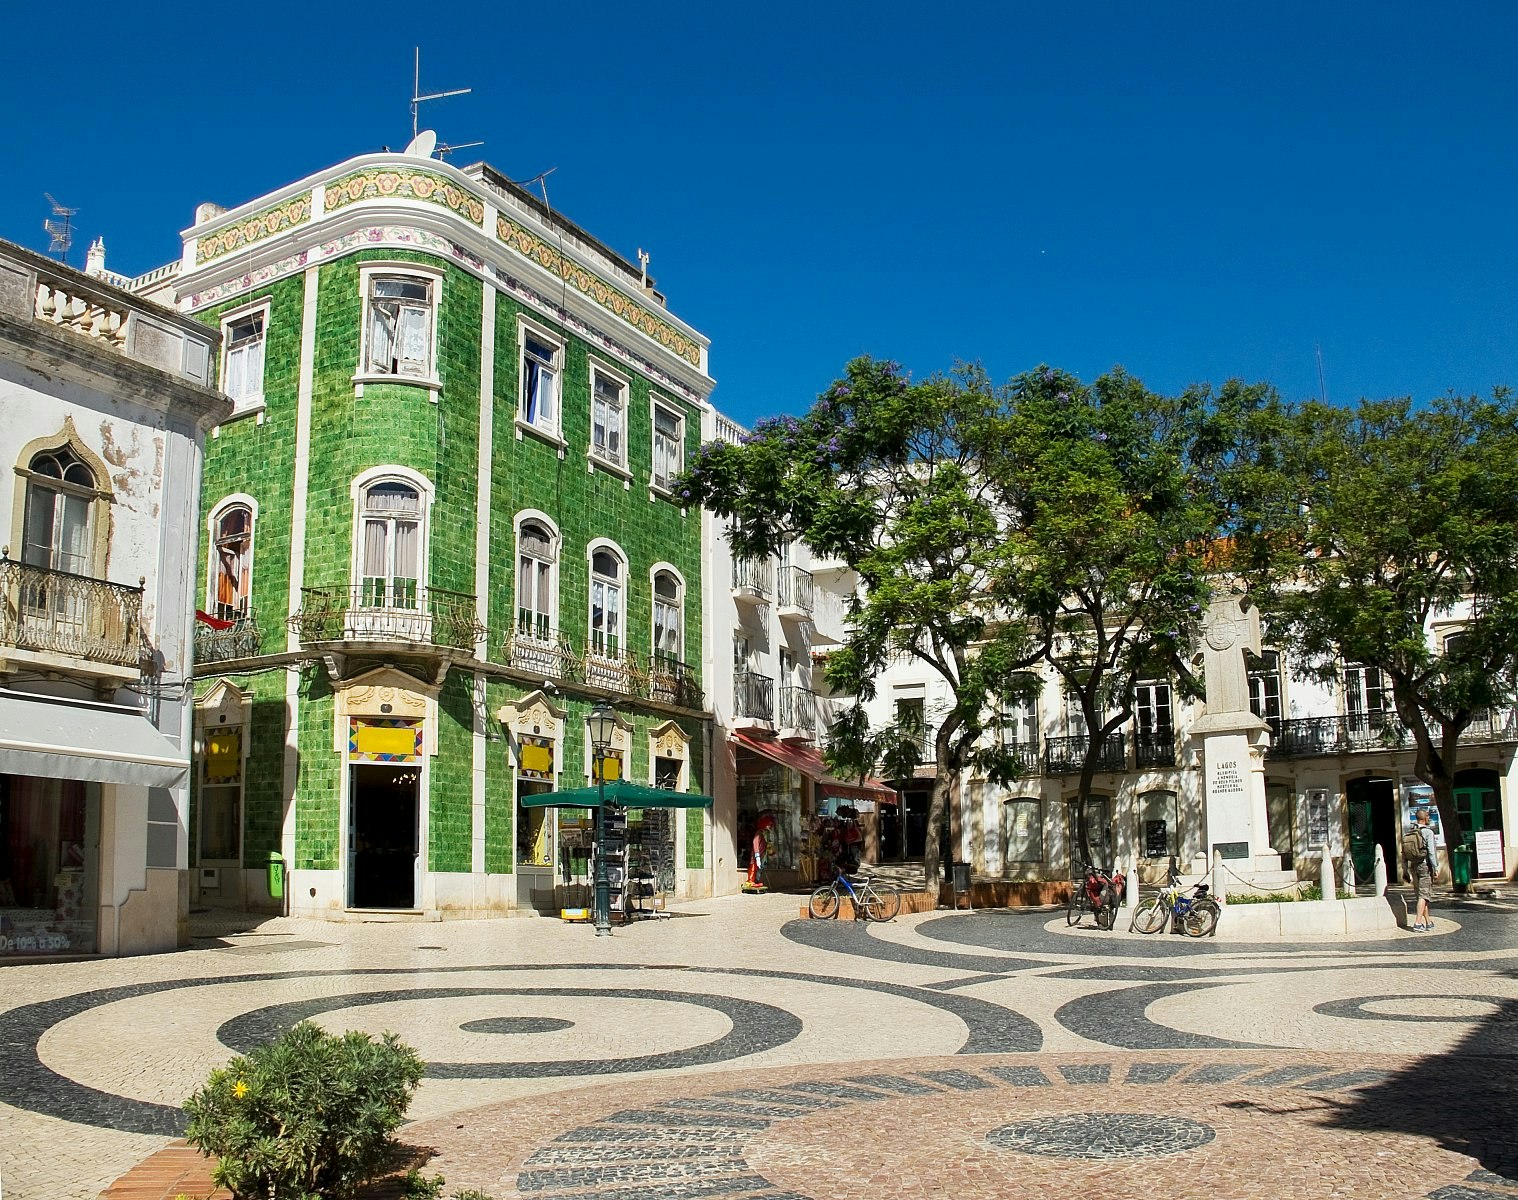 Looking over a sunlit square, paved with stones in a circular geometric pattern; the centre of attention is a handsome green tiled house, alongside white buildings and trees. 